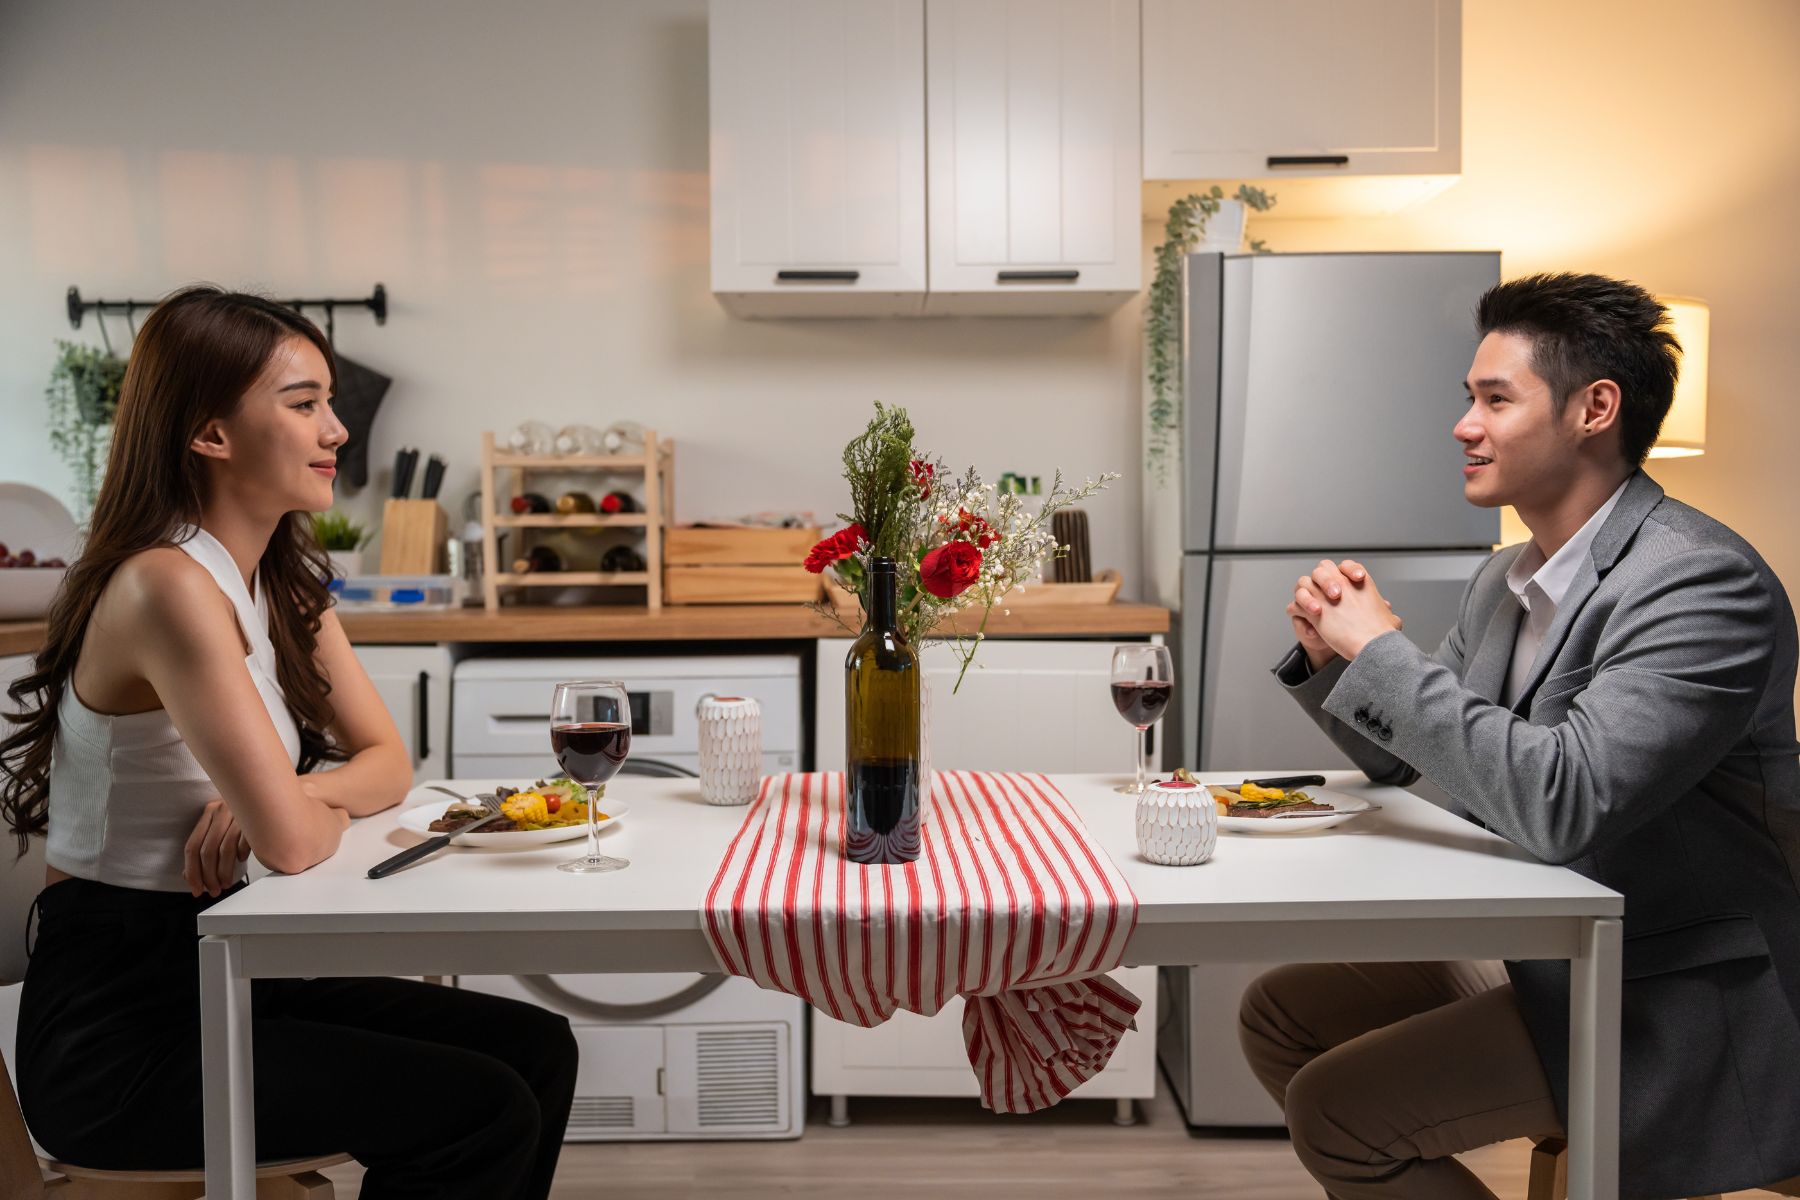 Asian young couple having dinner to celebrate valentine's day together. Attractive romantic new marriage man and woman having night party eat foods on table for wedding anniversary in kitchen at home.